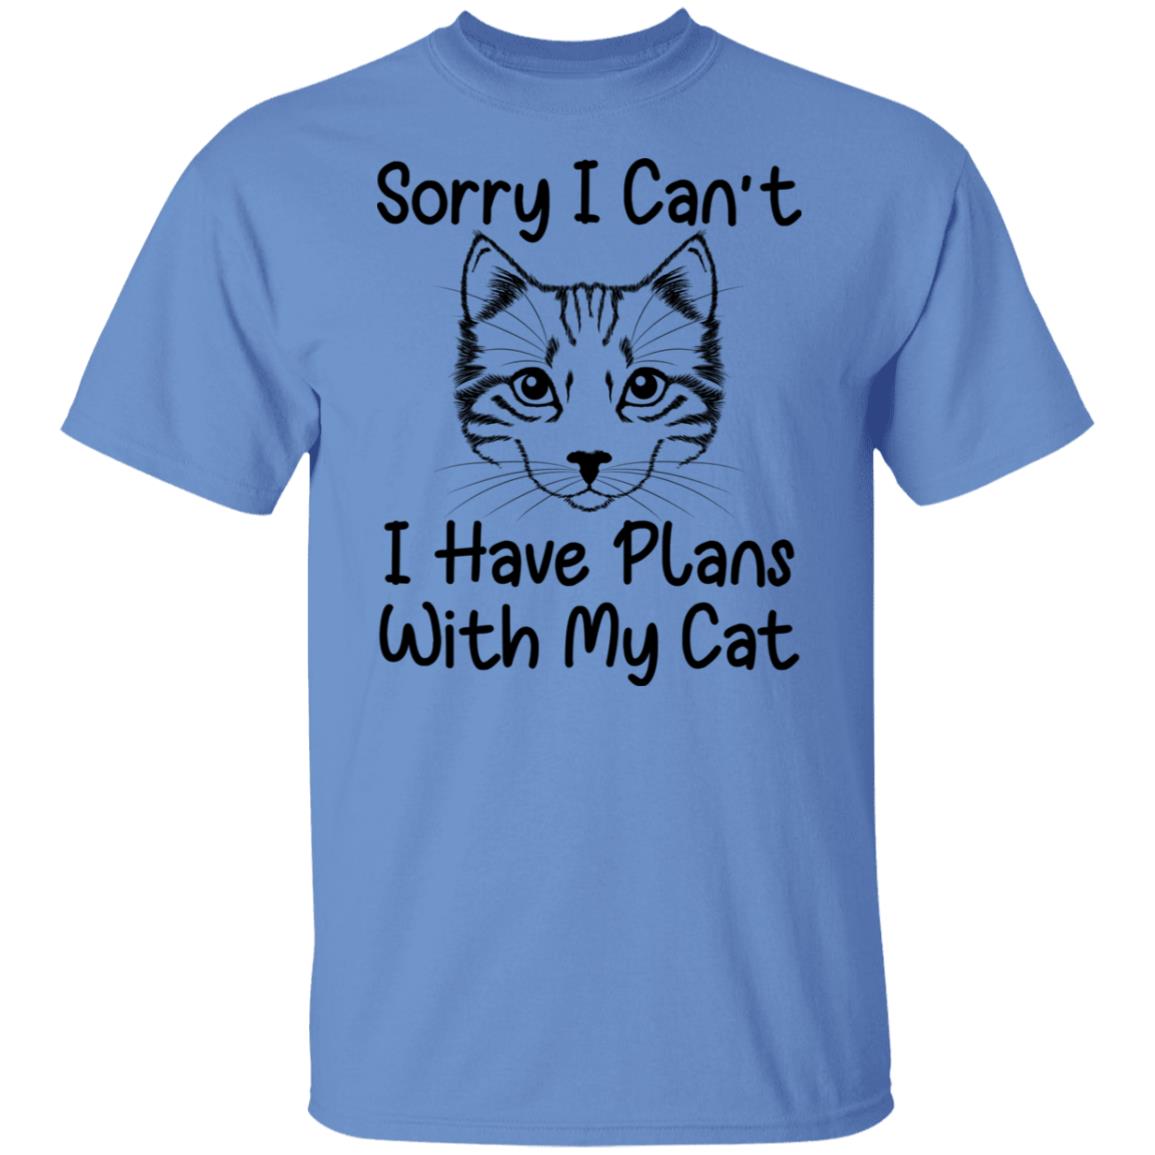 Sorry I can't, I have plans with my cat tshirt